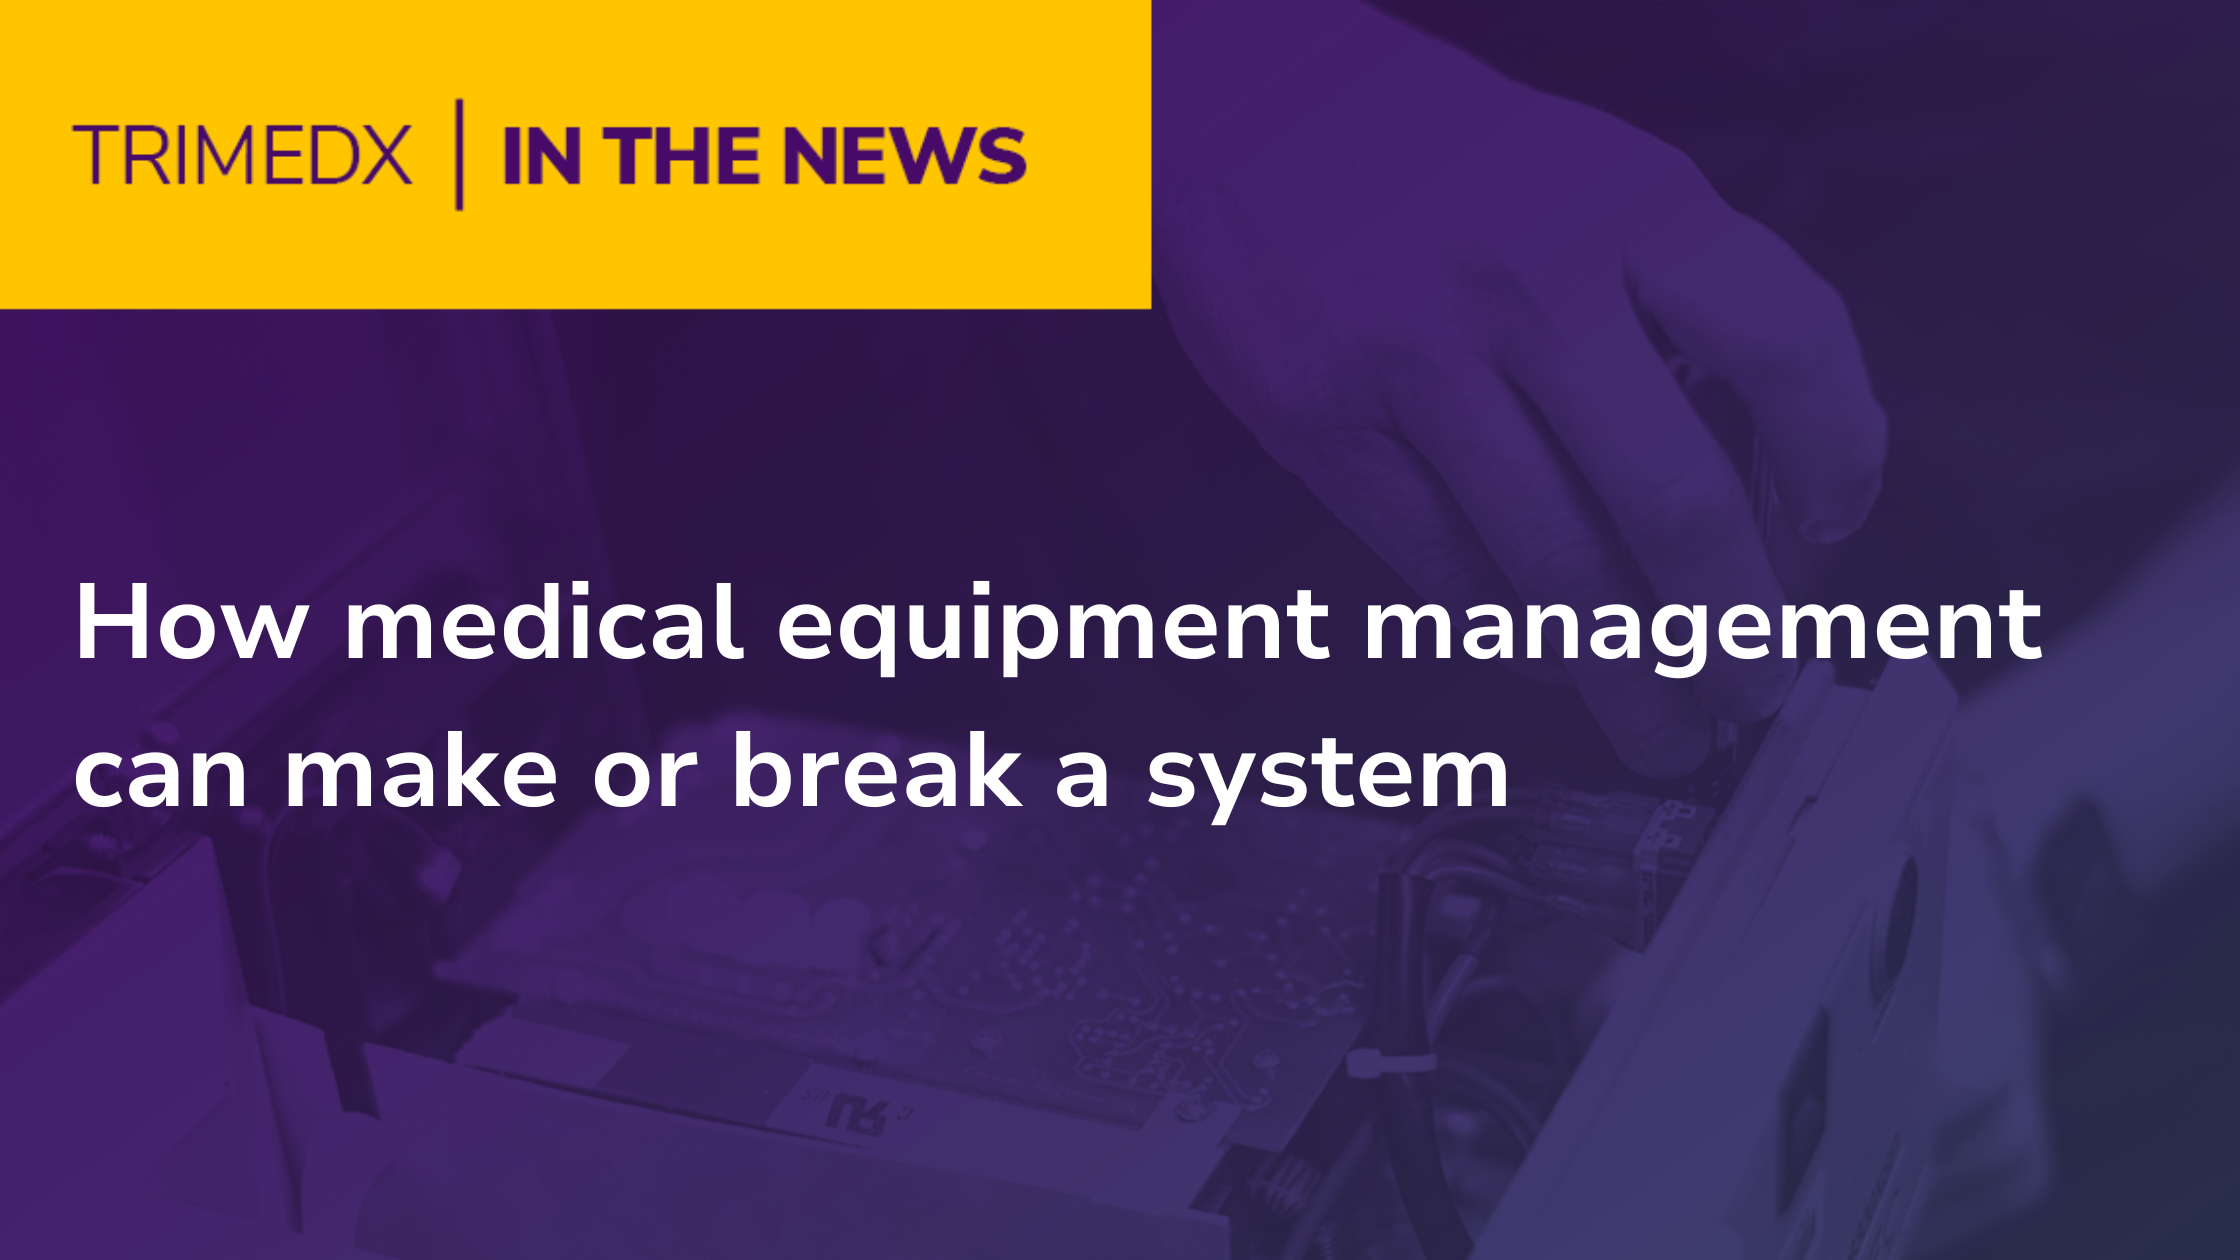 How medical equipment management can make or break a system - TRIMEDX in the News